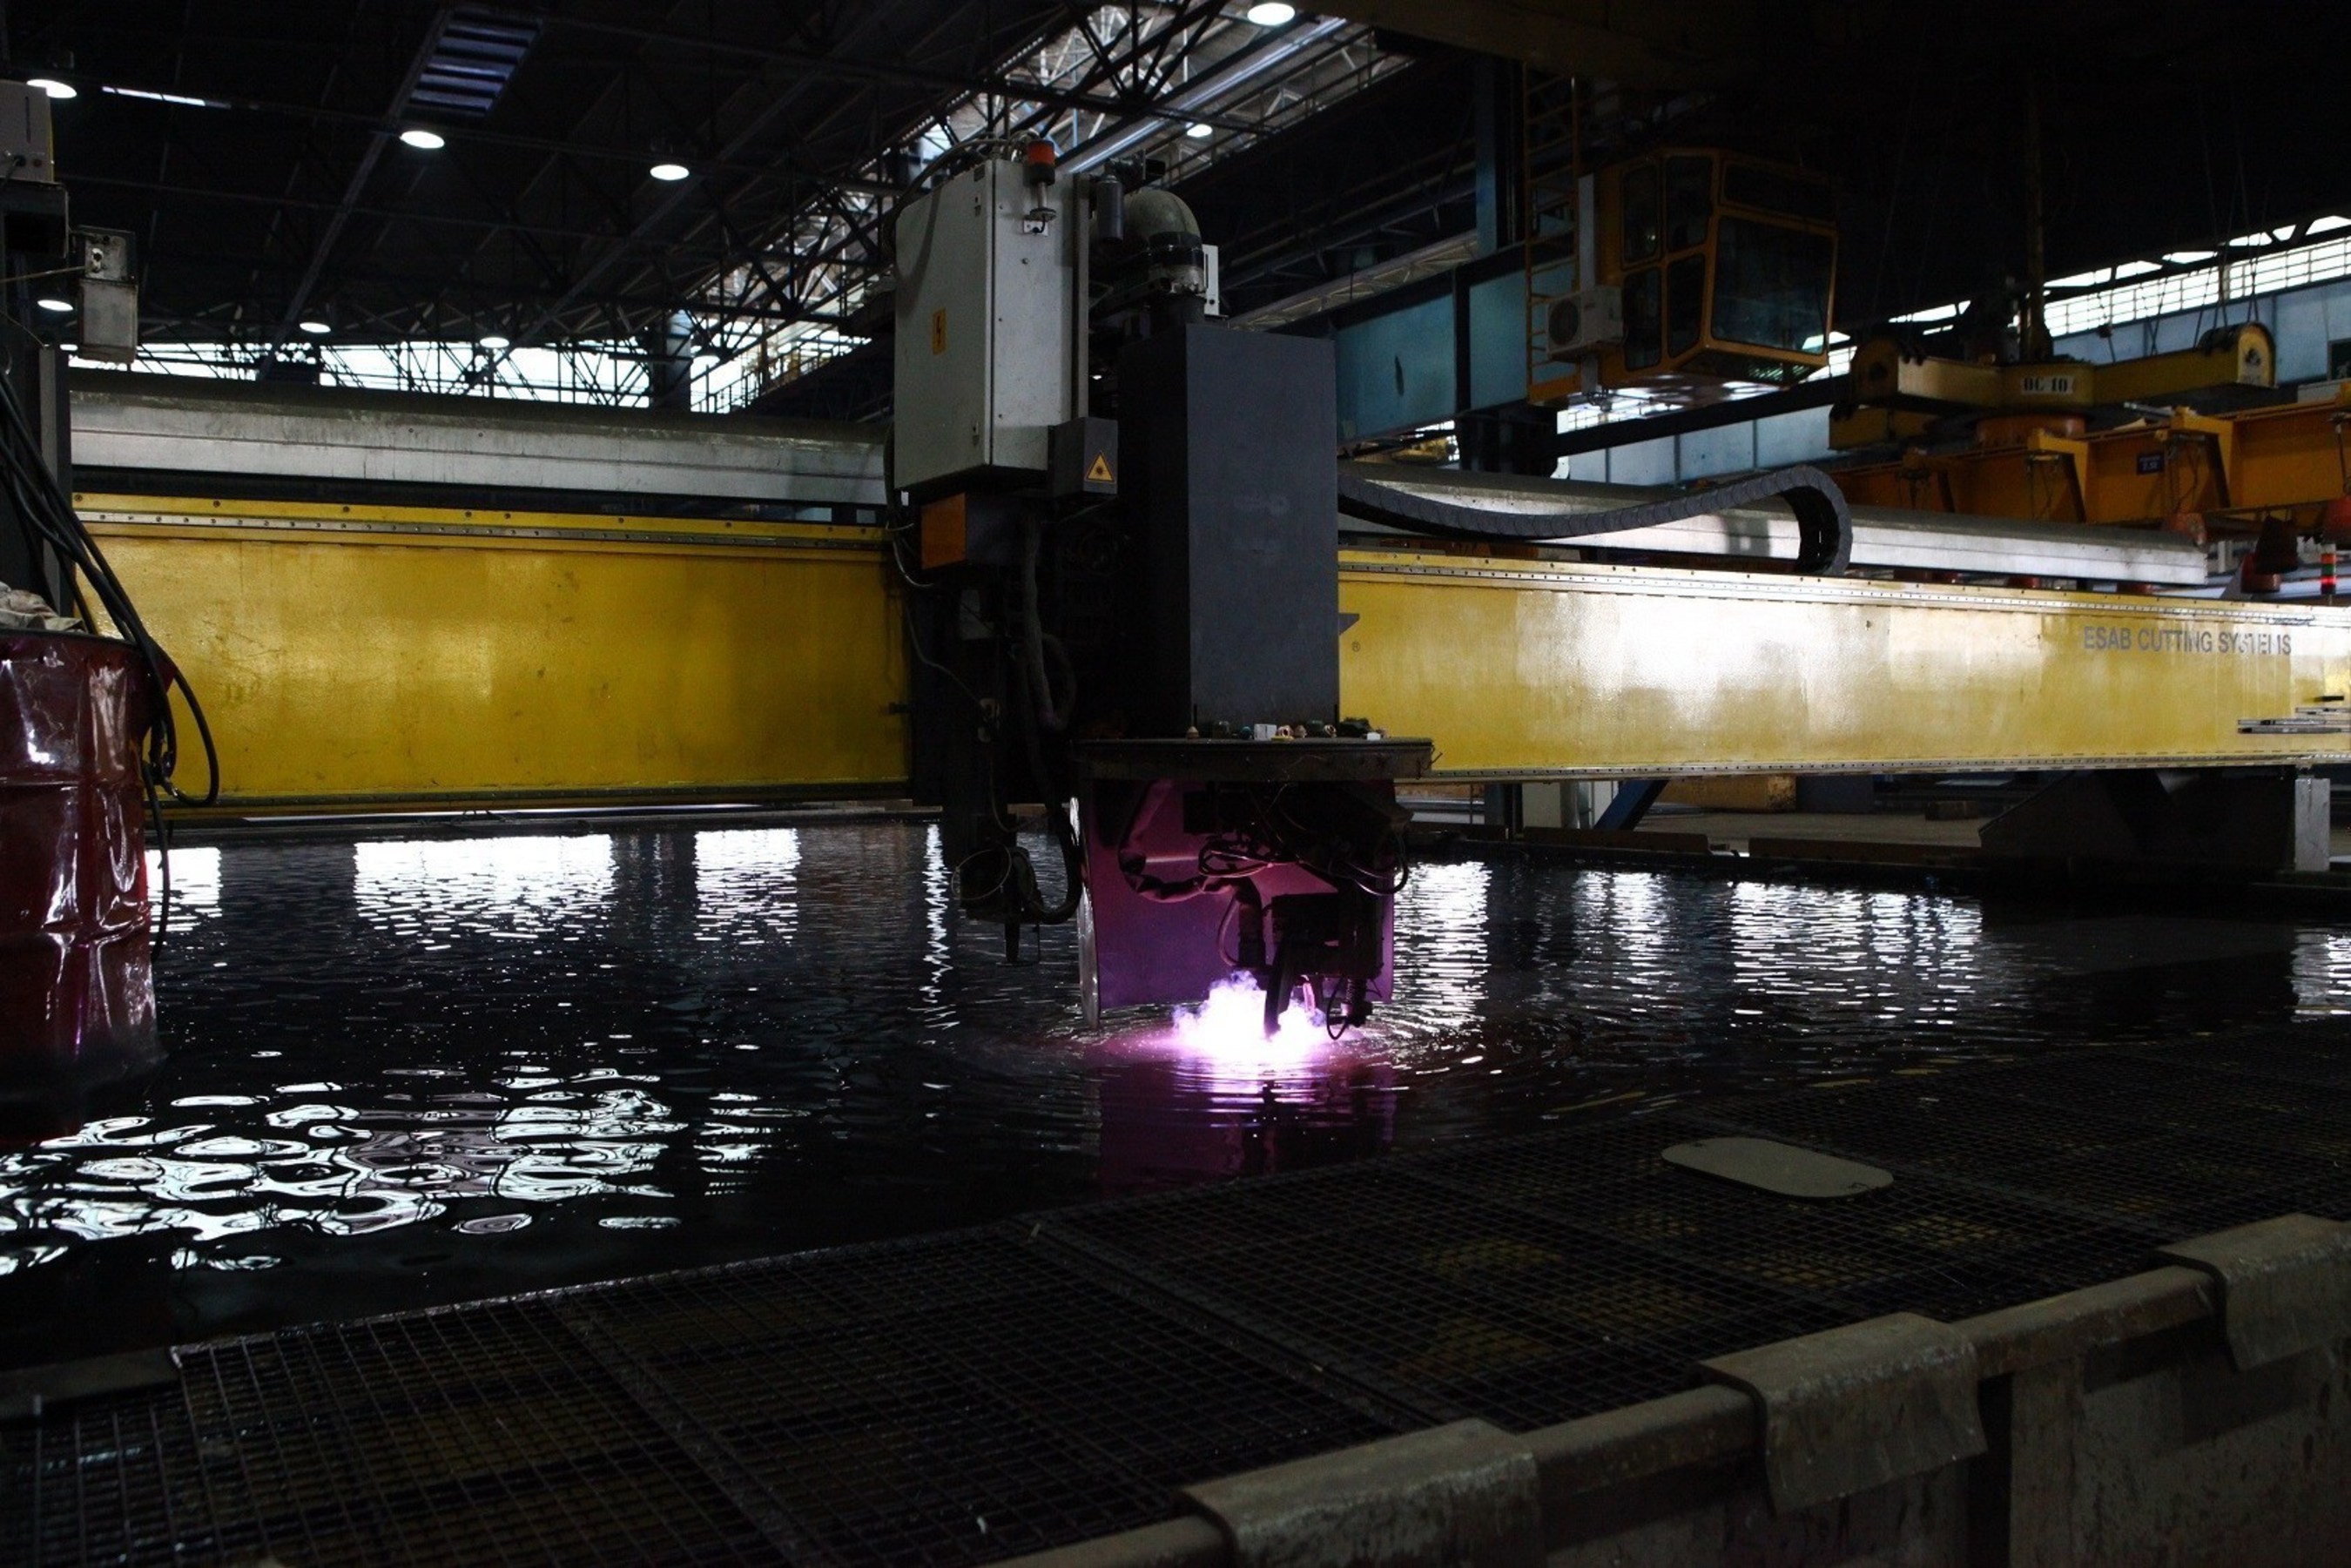 The first piece of steel is cut for Seabourn Encore, Seabourn's new ship due for delivery in late 2016.